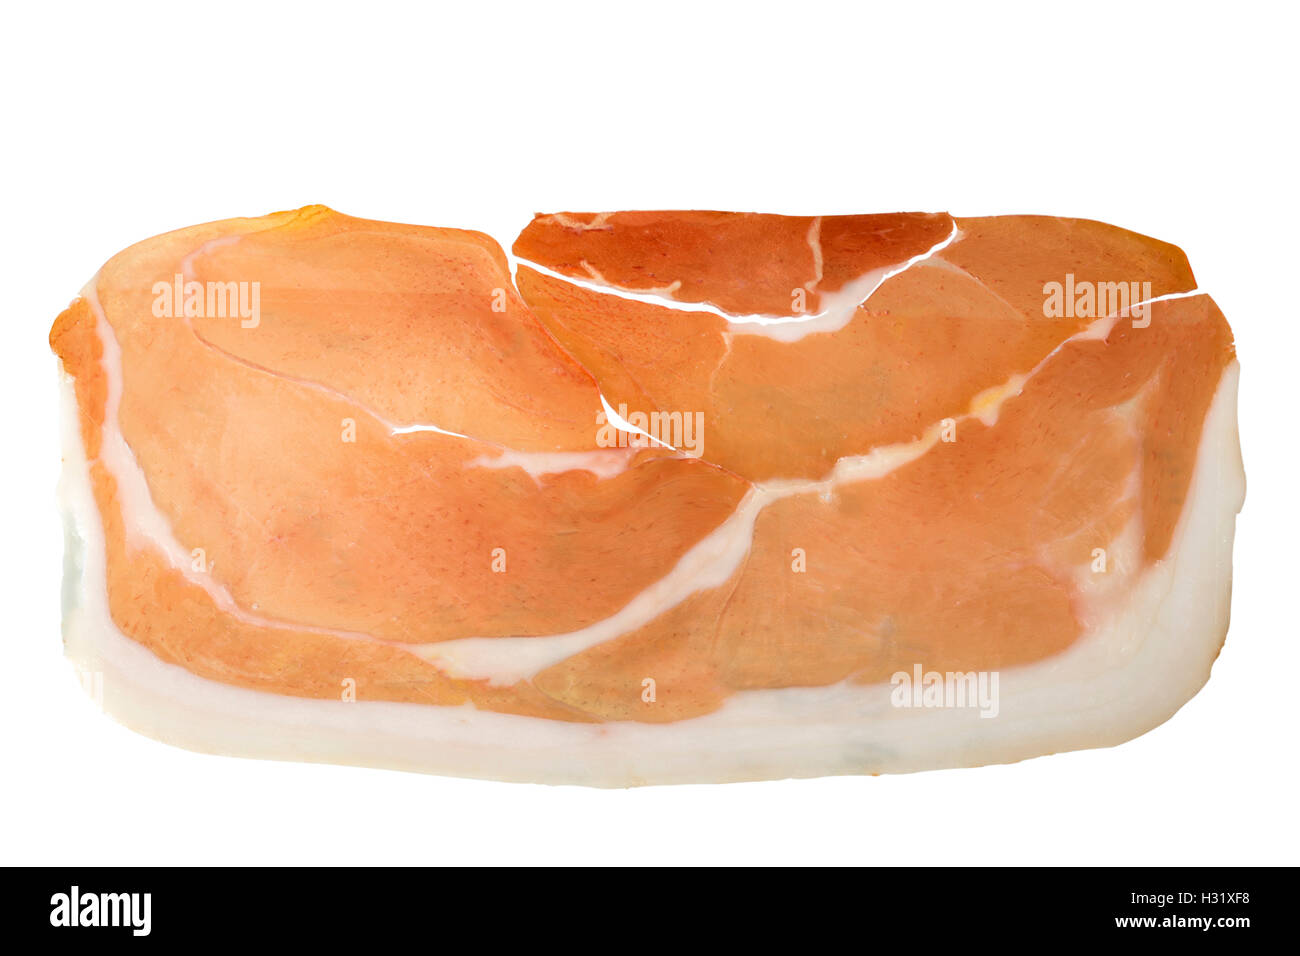 Dry Cured Smoked Pork Ham Prosciutto Slice Isolated on White Background with clipping path included Stock Photo